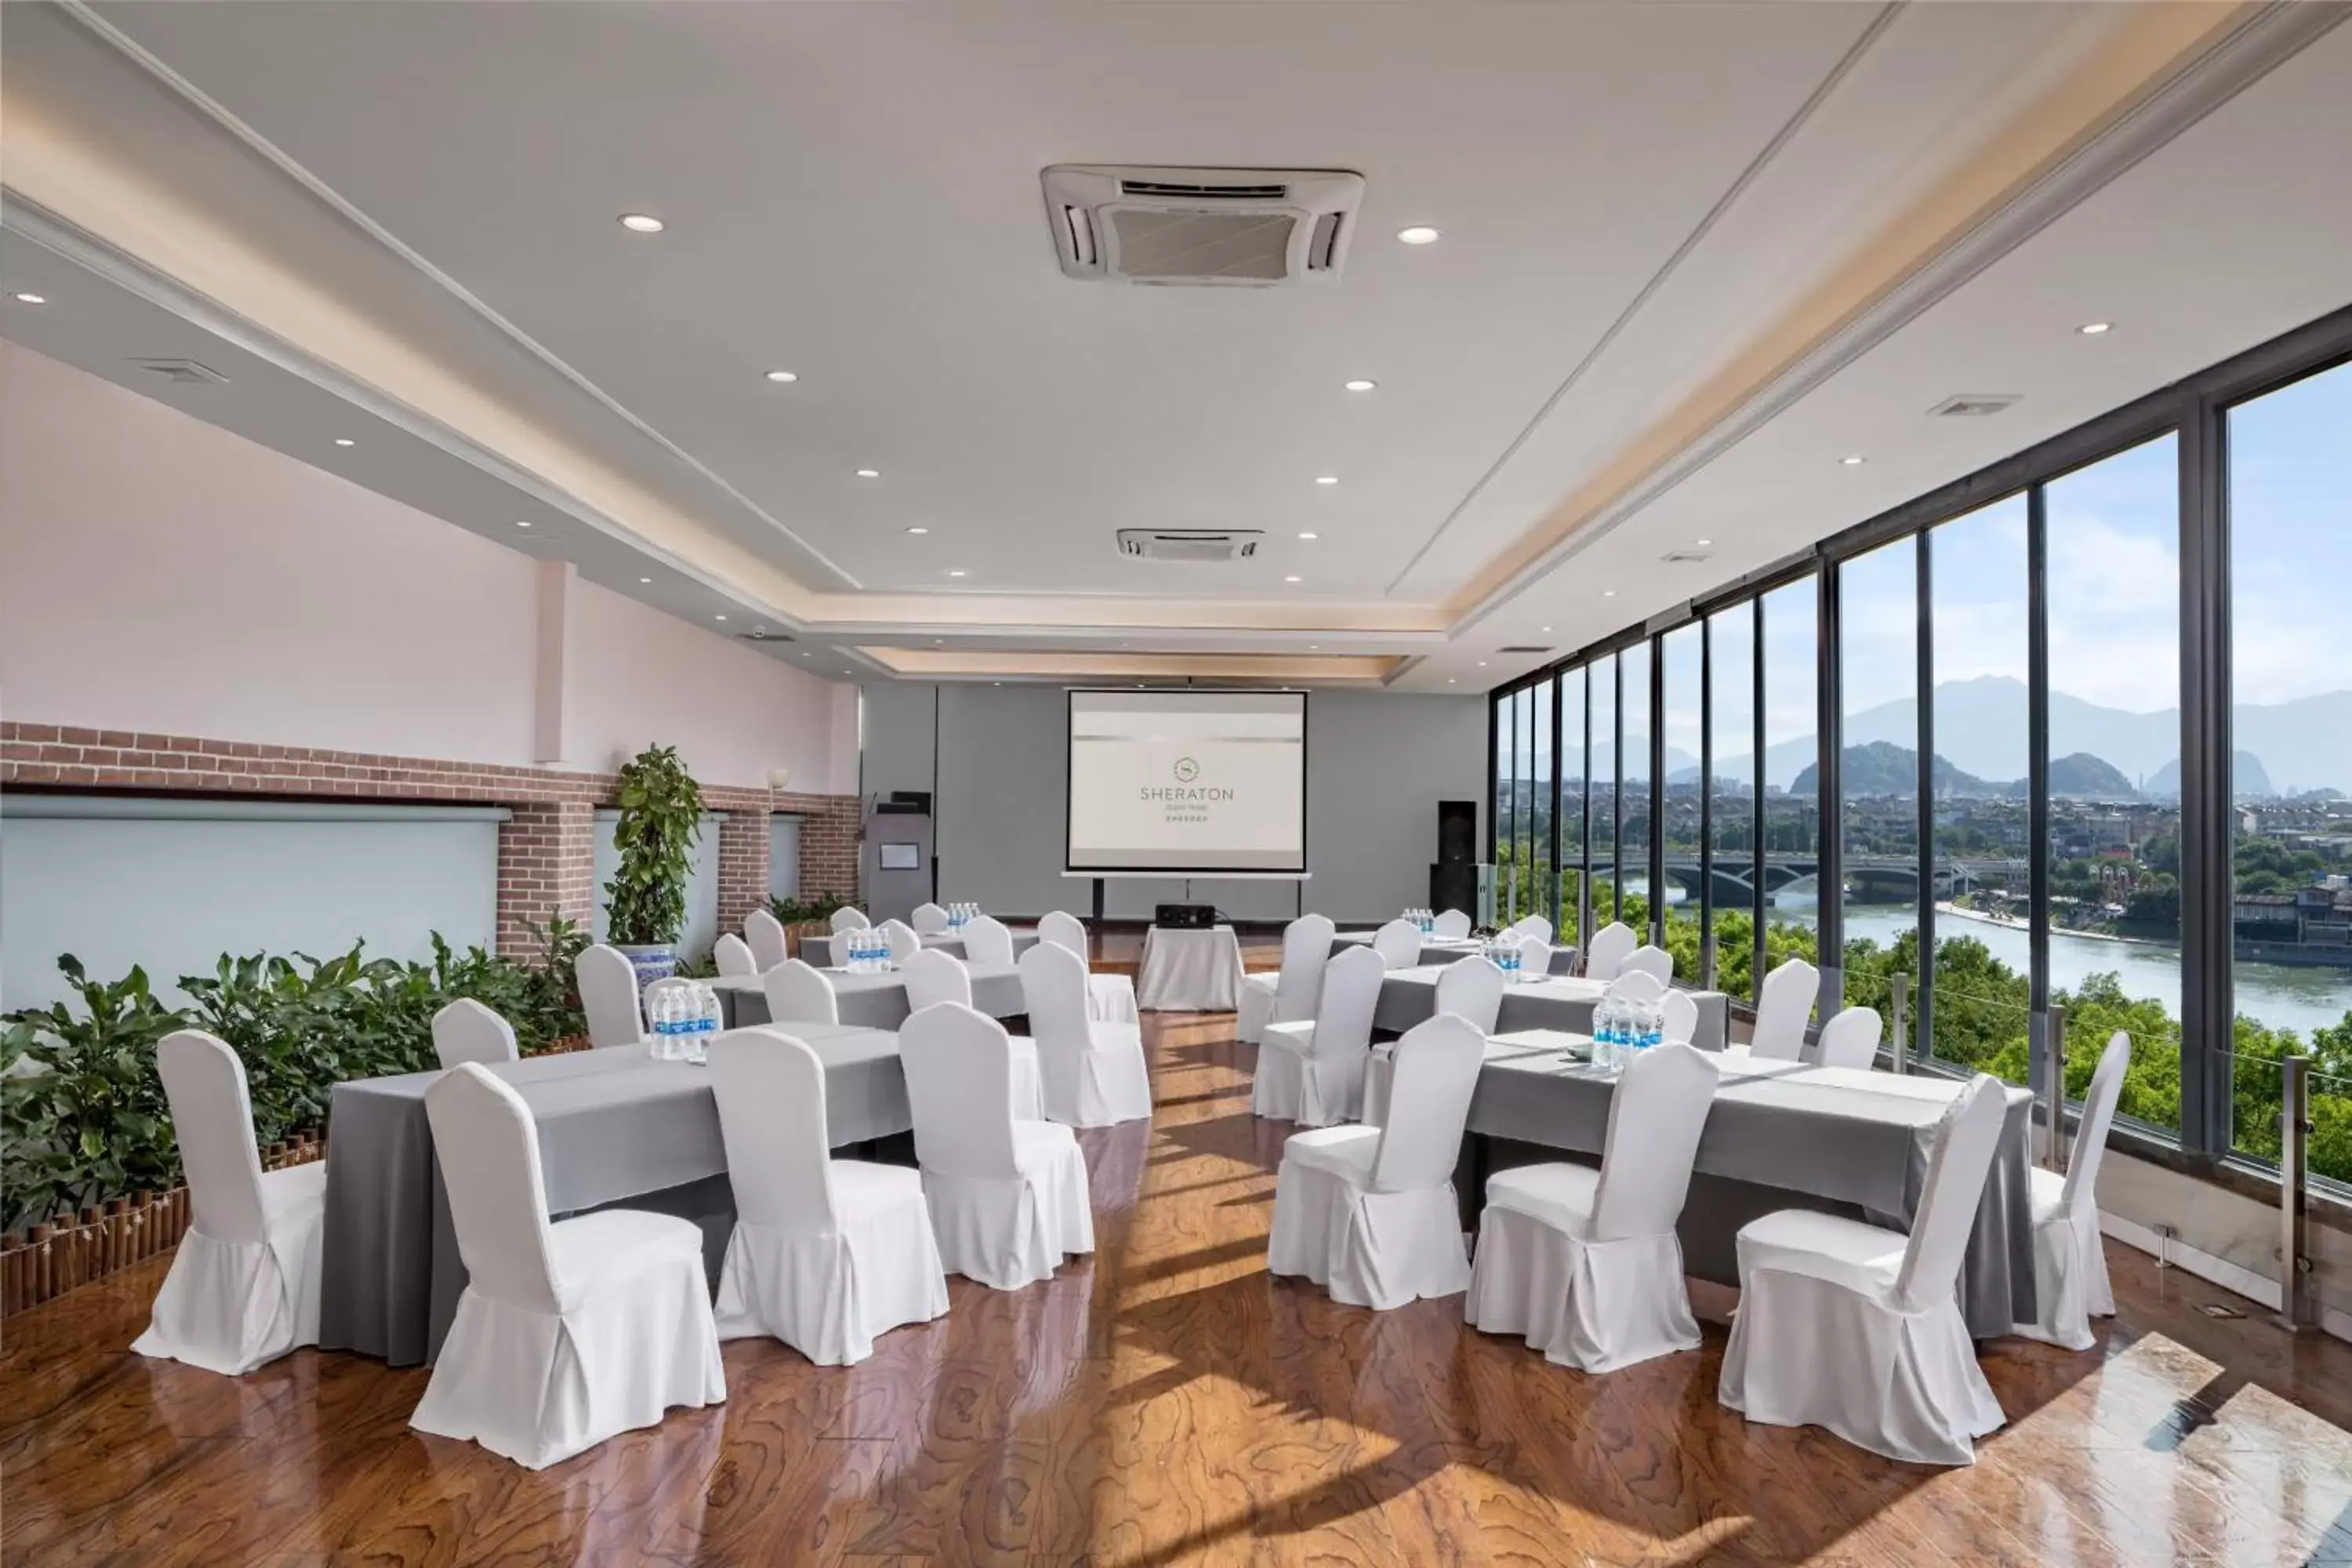 Meeting/conference room, Banquet Facilities in Sheraton Guilin Hotel